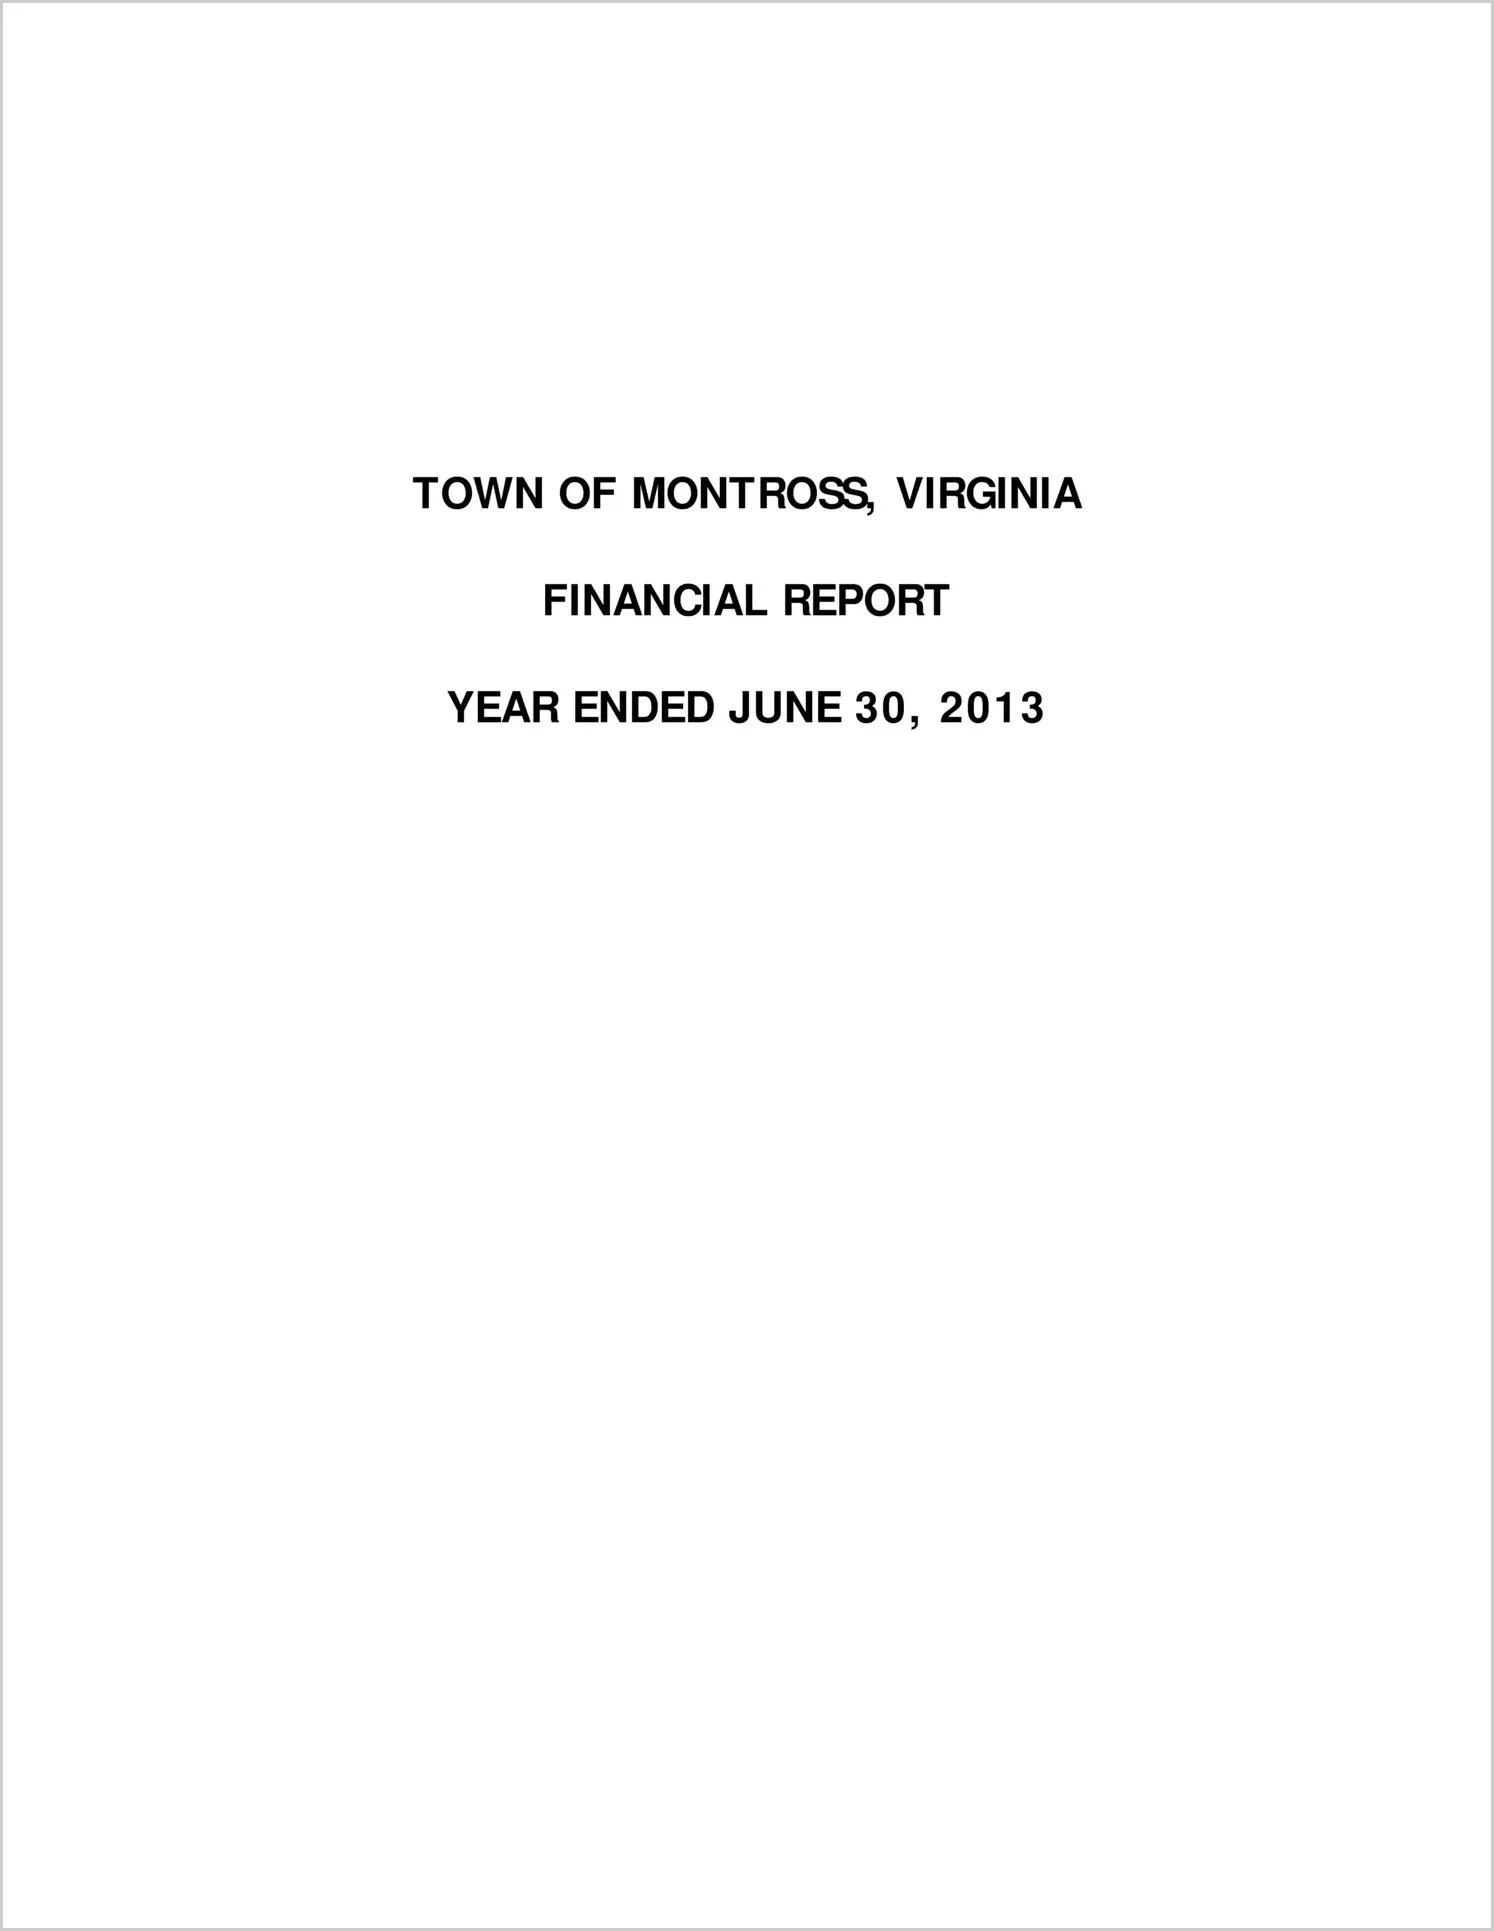 2013 Annual Financial Report for Town of Montross